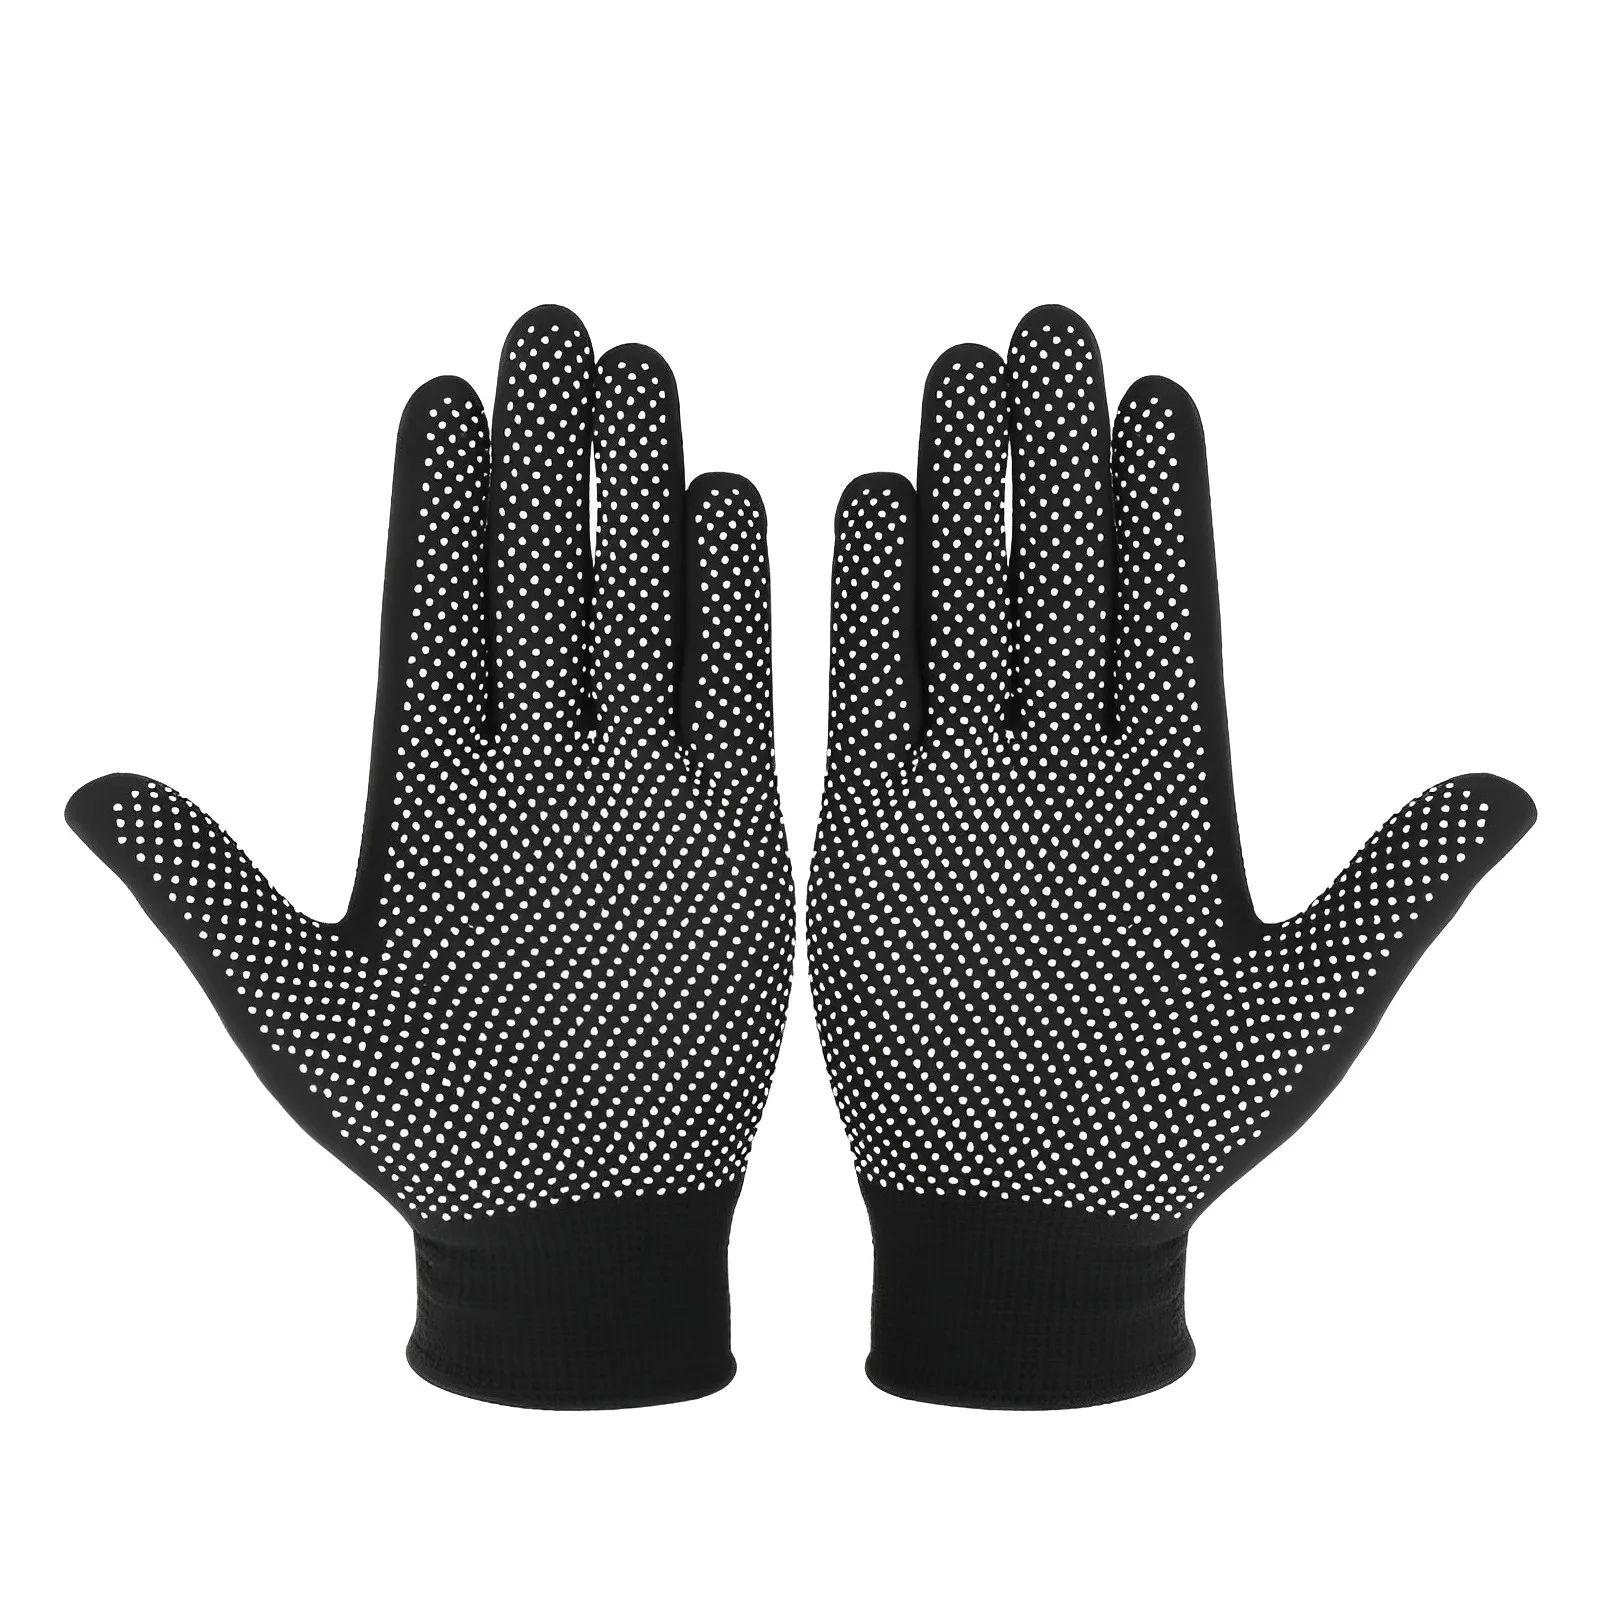 Car Washing Anti-Static Nylon Gloves Motorcycle Gloves Anti-slip Breathable Install Protective Tools Auto Accessories Men Women